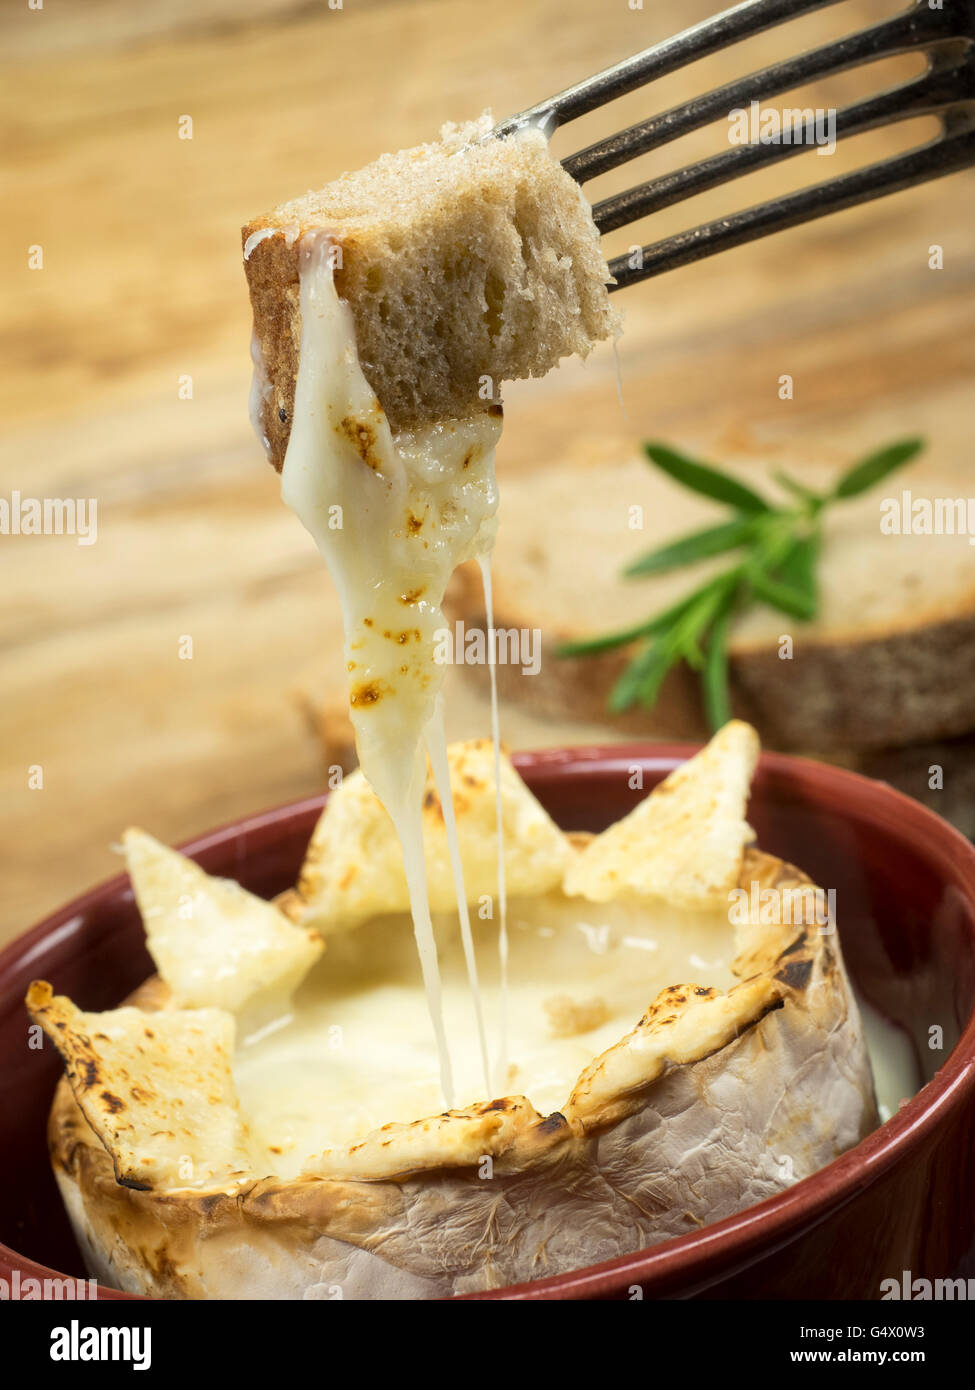 Baked Camembert made from goat cheese with bread cubes Stock Photo